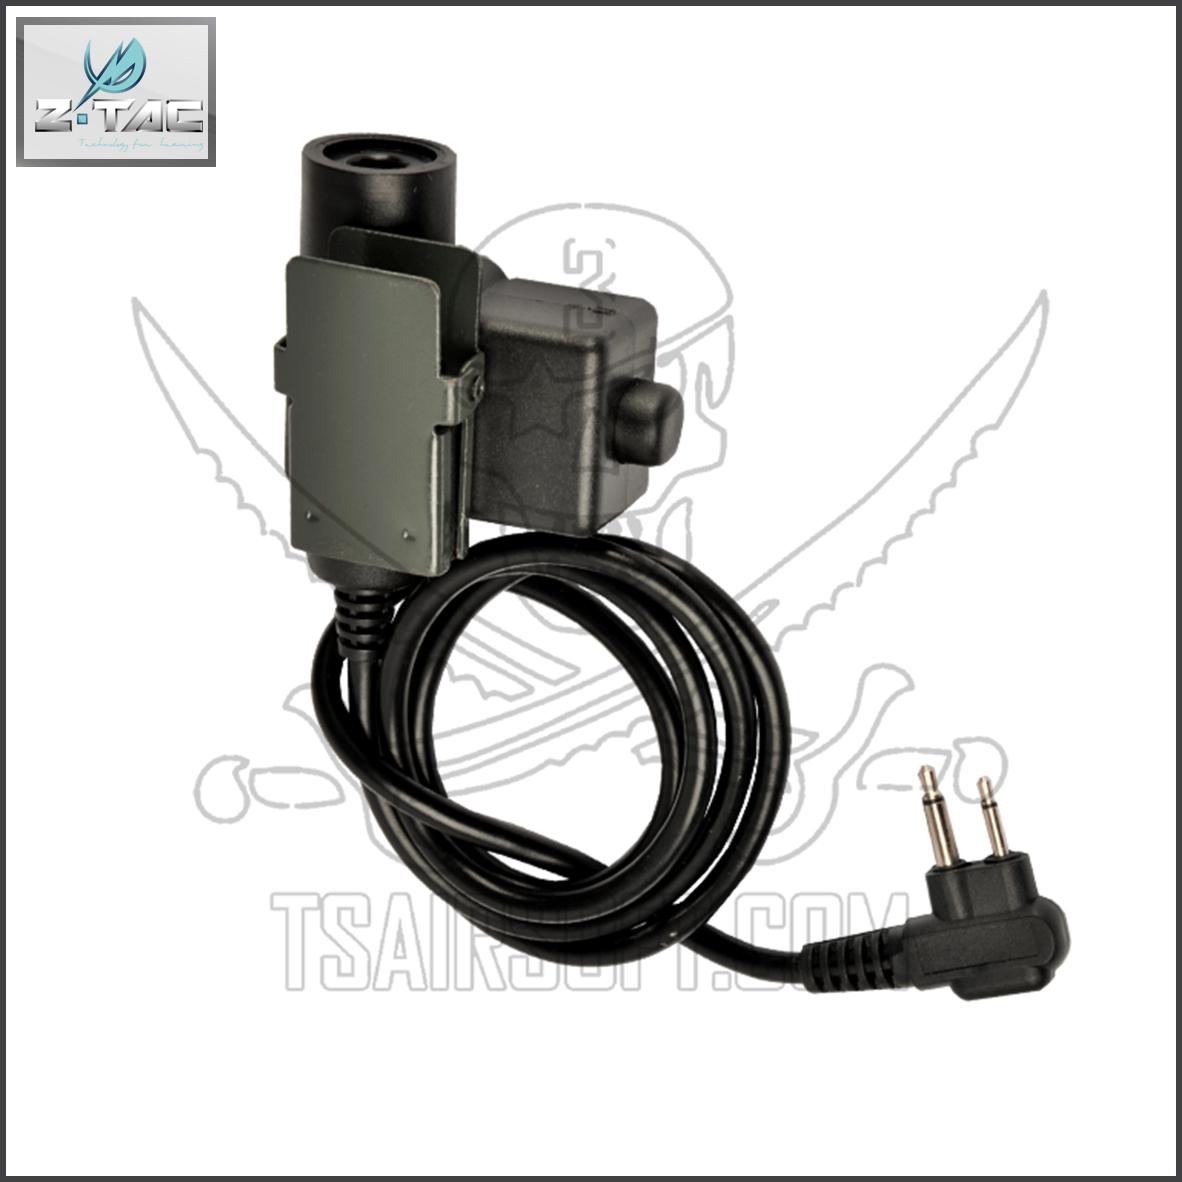 Armorwerx U94 PTT System Compatible with Kenwood/Baofeng Radio Peltor Wired